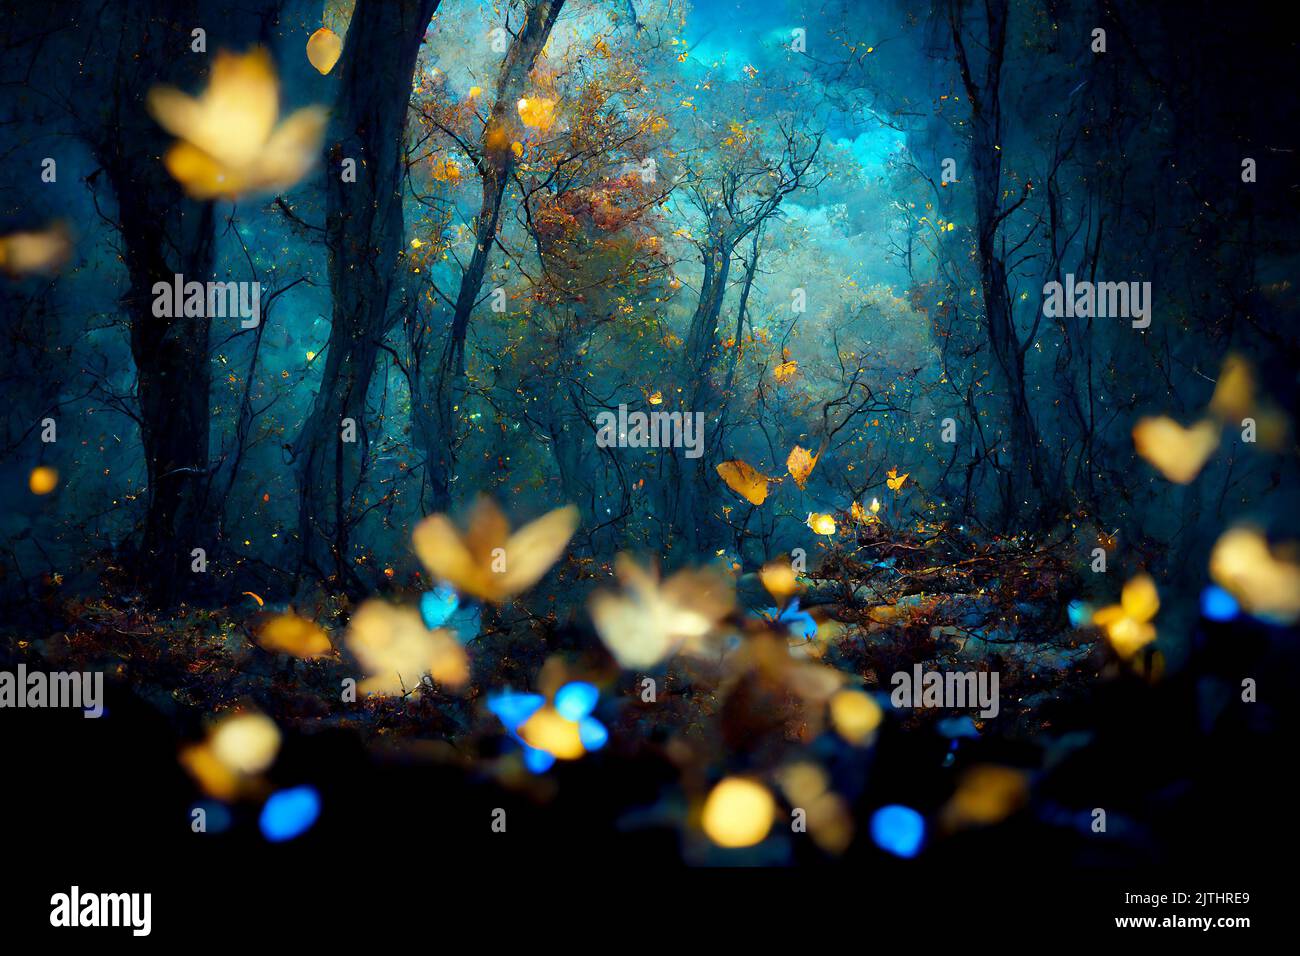 Dark fairytale fantasy forest. 3D illustration AI generated art, painting style Stock Photo